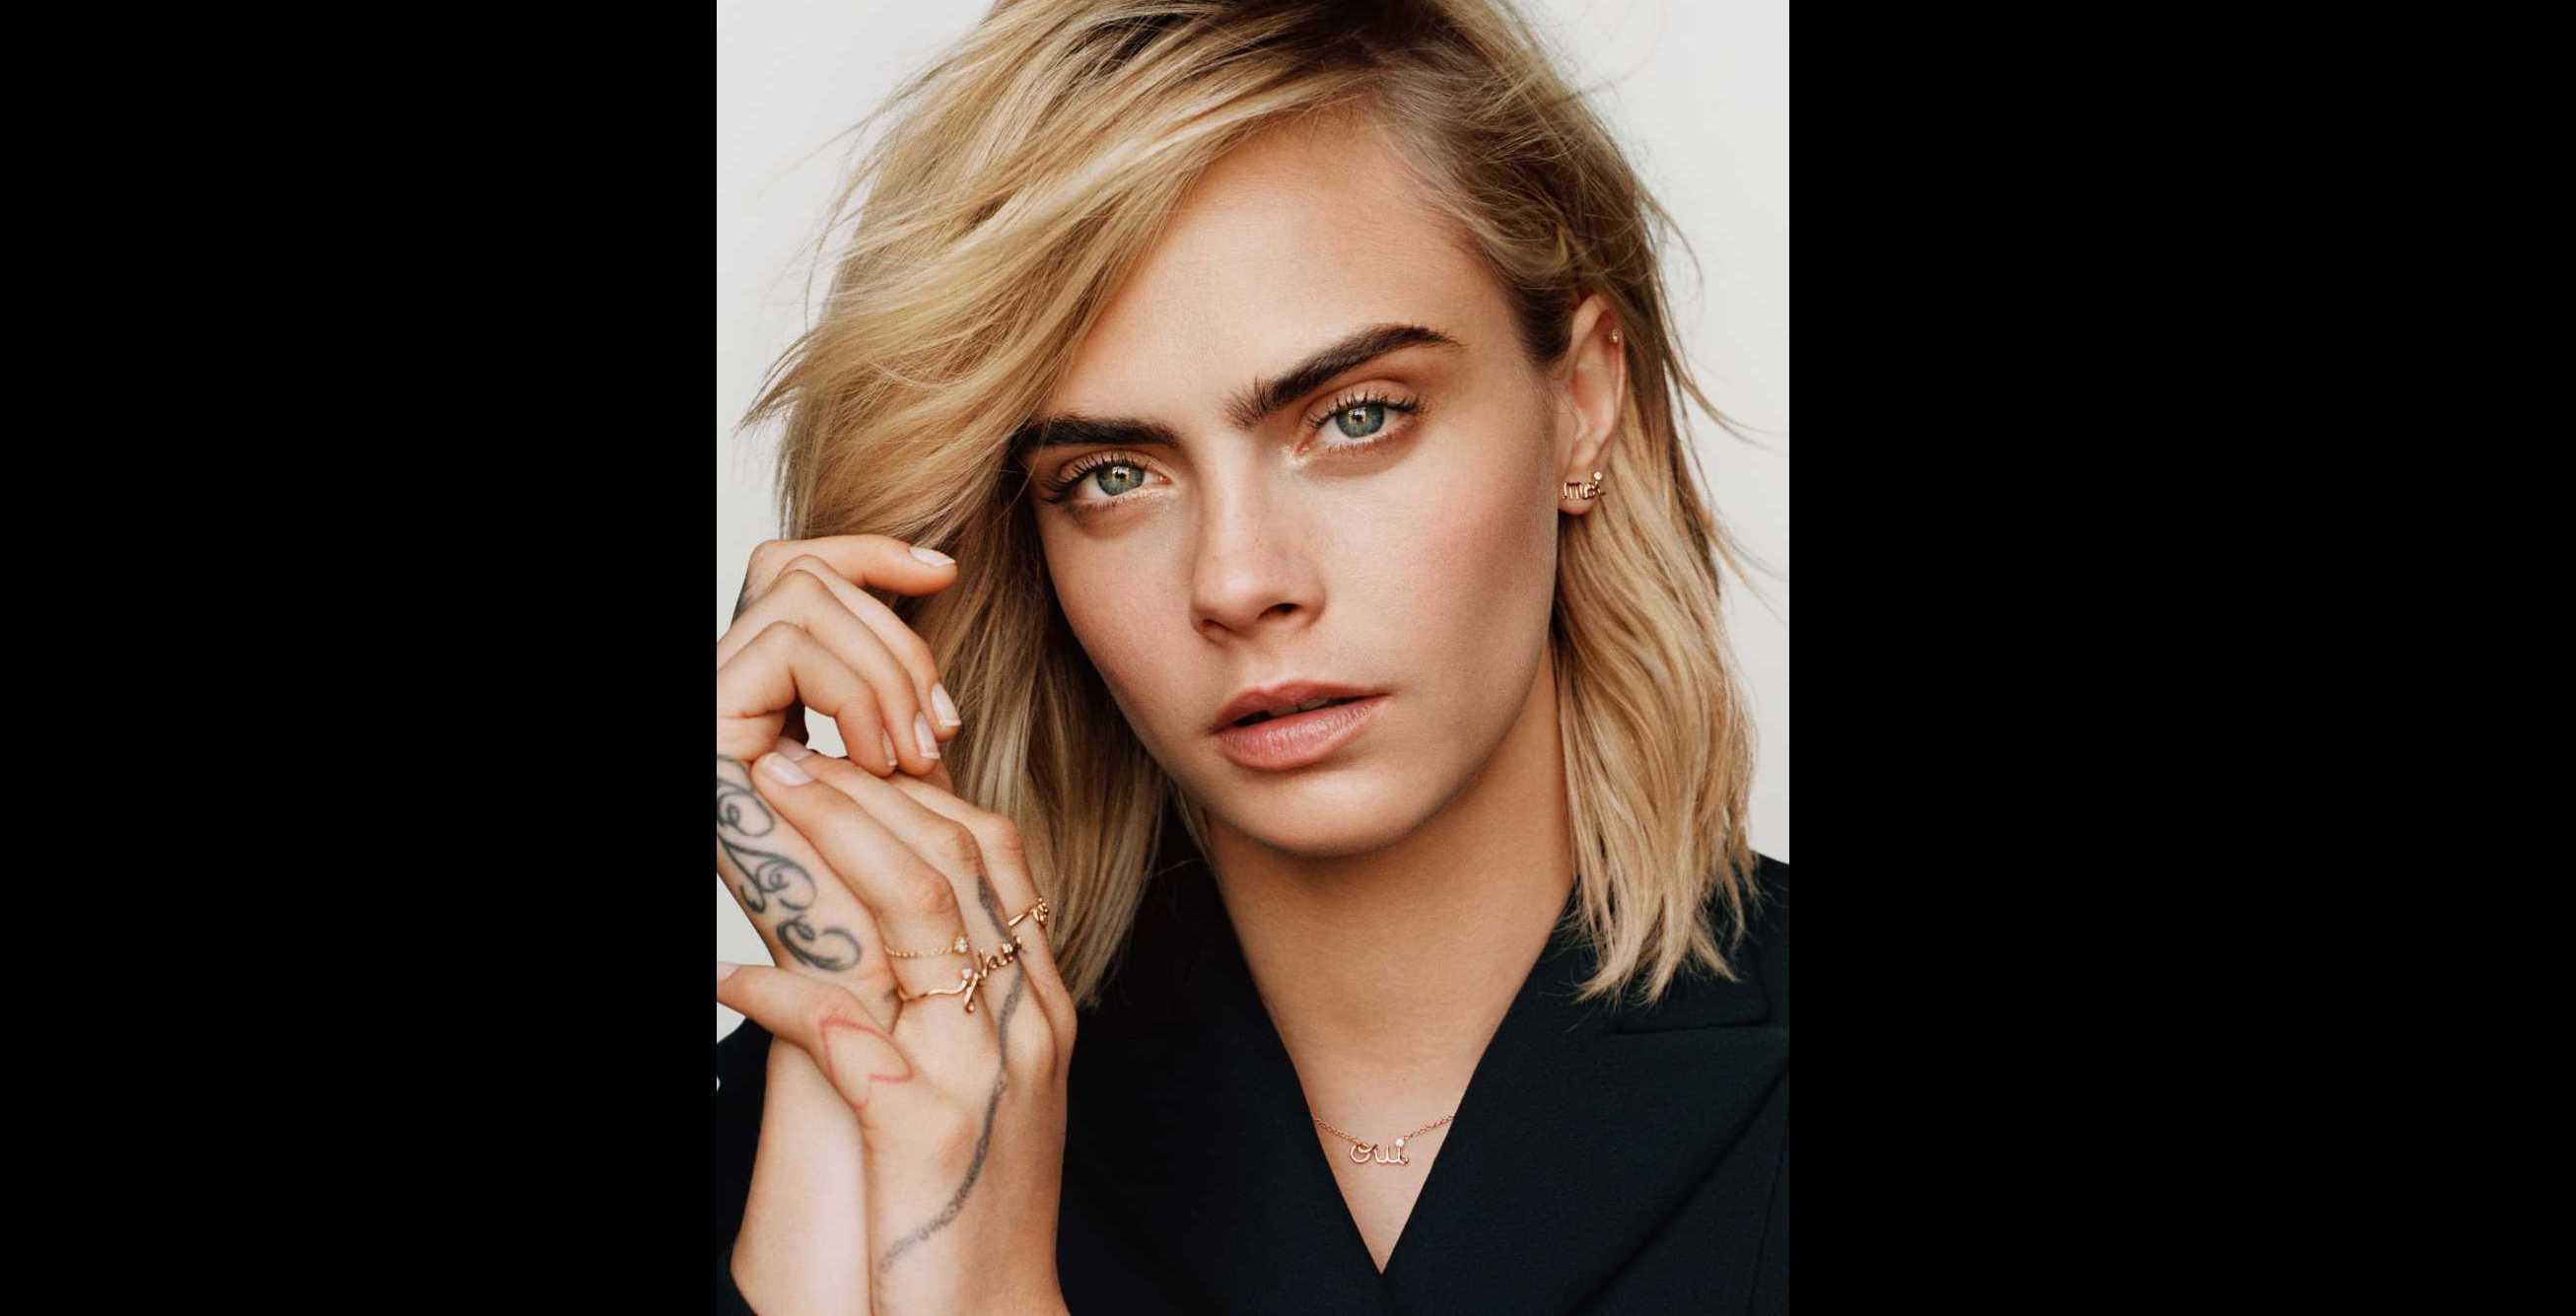 Cara Delevingne says “Oui” for the new Dior Joaillerie campaign